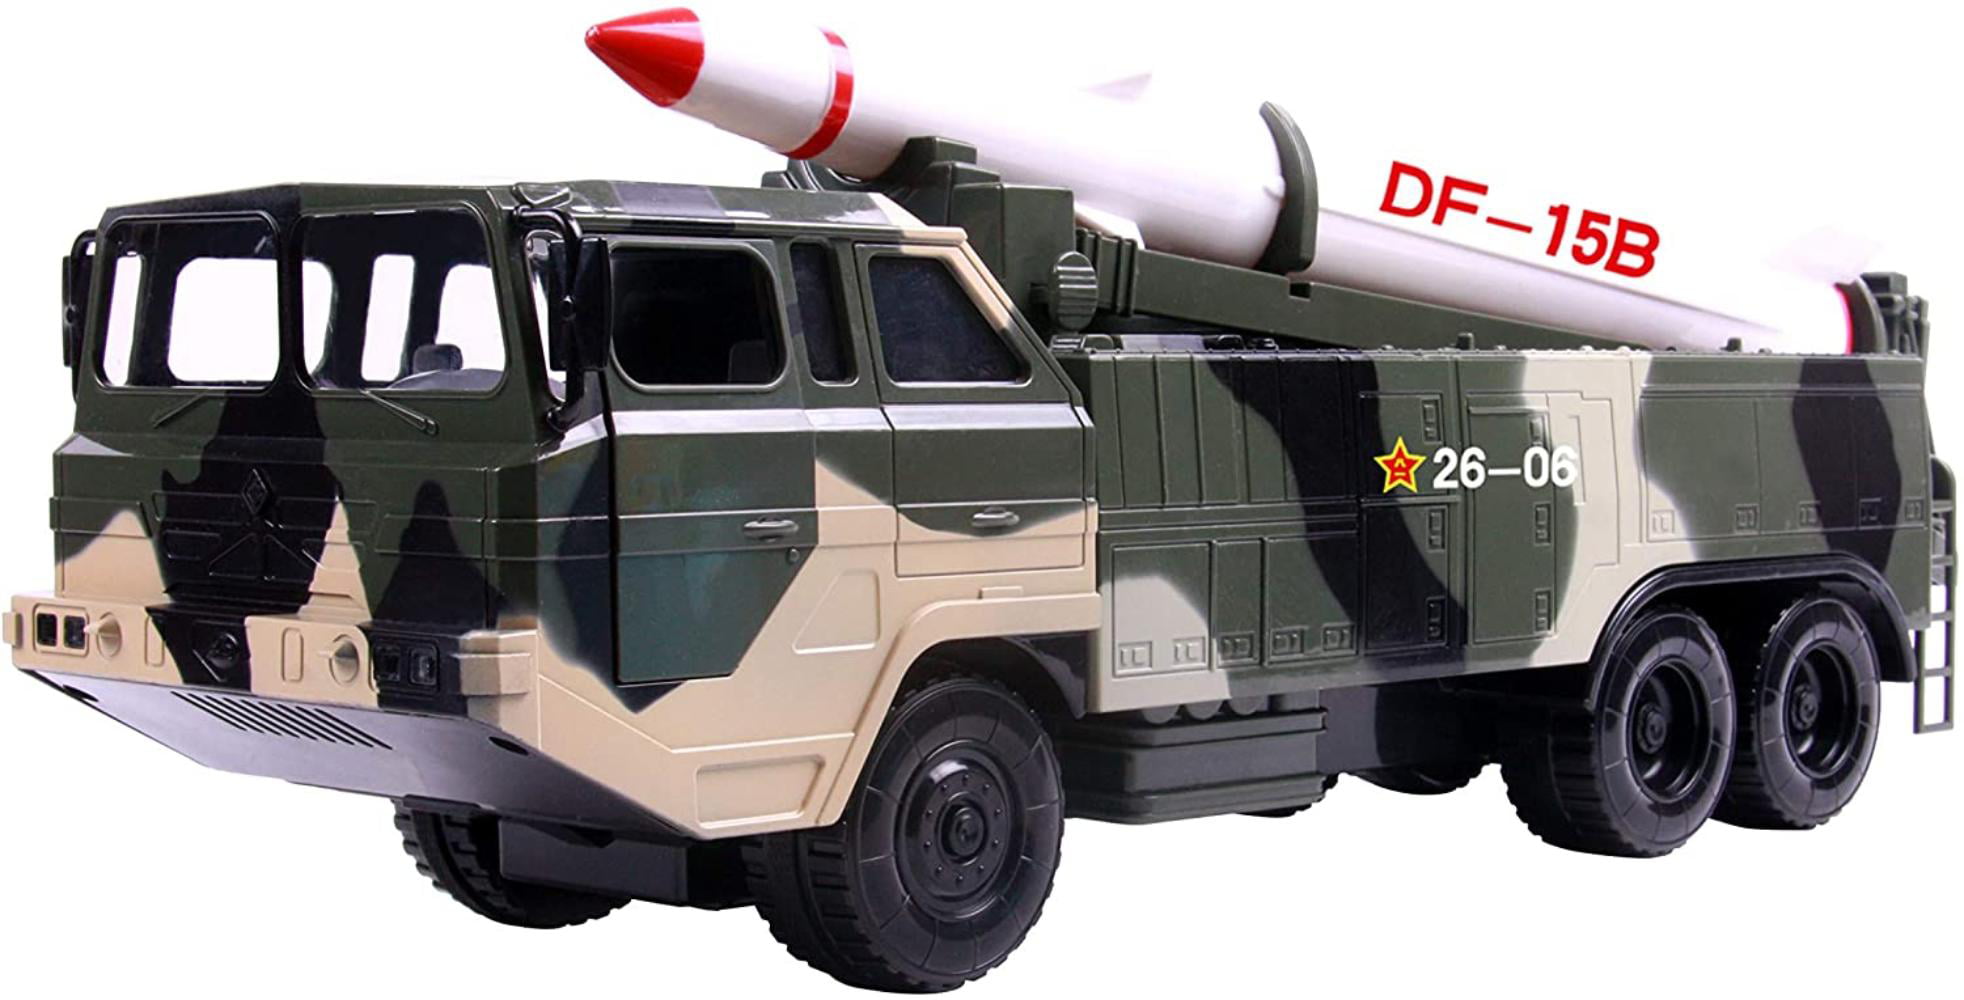 3PCS 1:64 Army Men Soldiers Toy Battlefield Kits Fighter Plane Missile Truck 